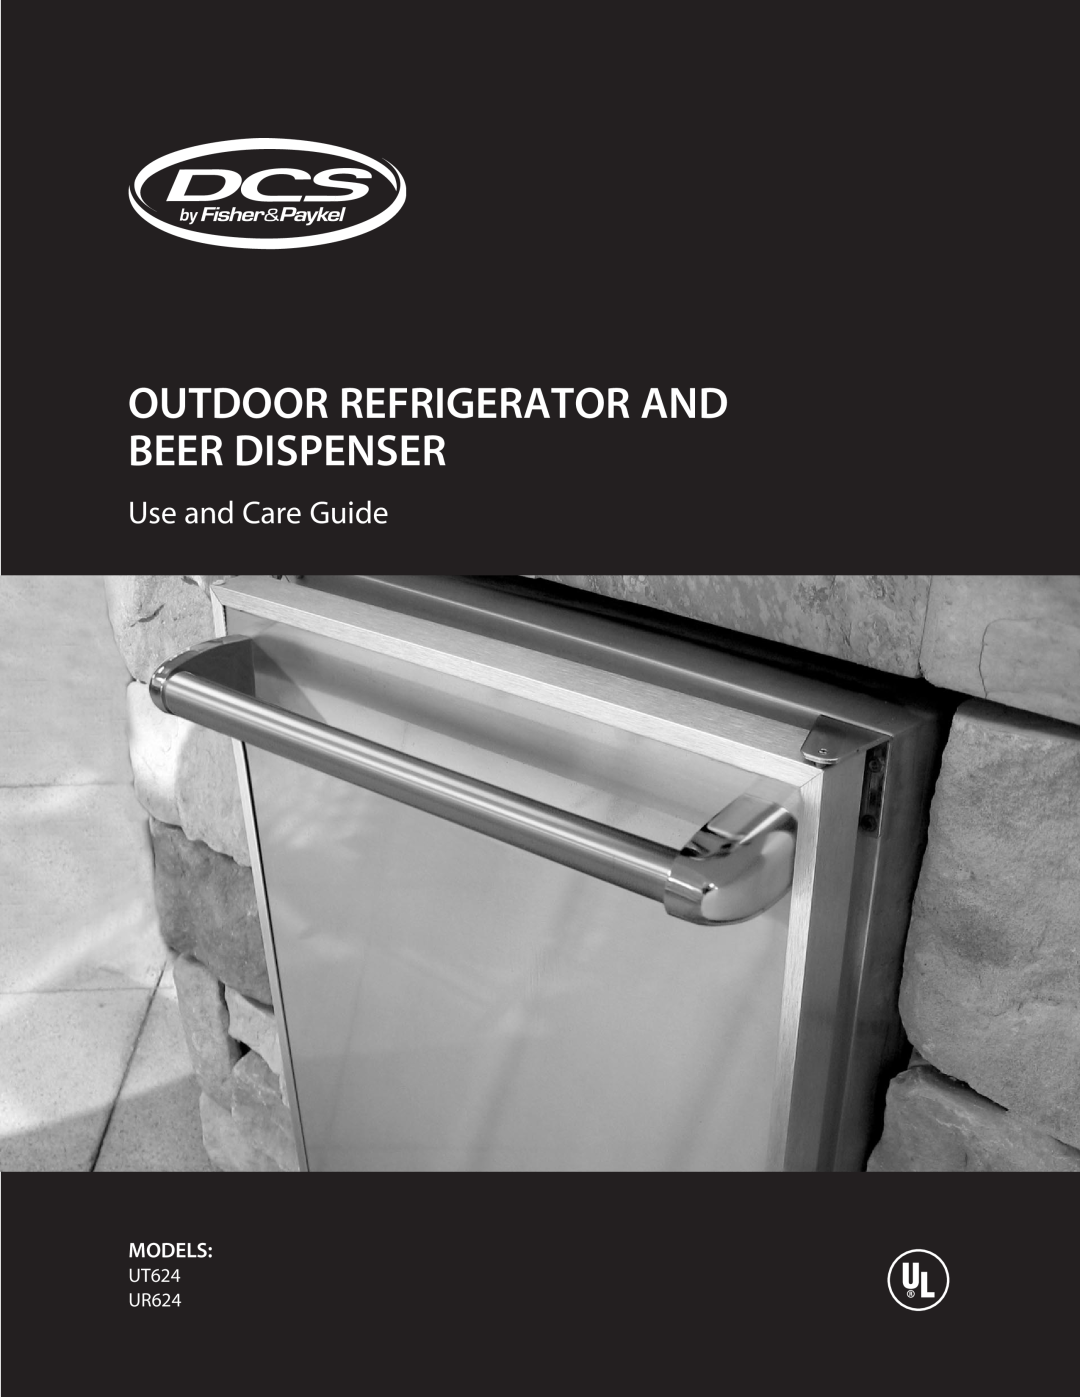 DCS UT624 manual Use and Care Guide, Models, UR624, Outdoor Refrigerator And Beer Dispenser 